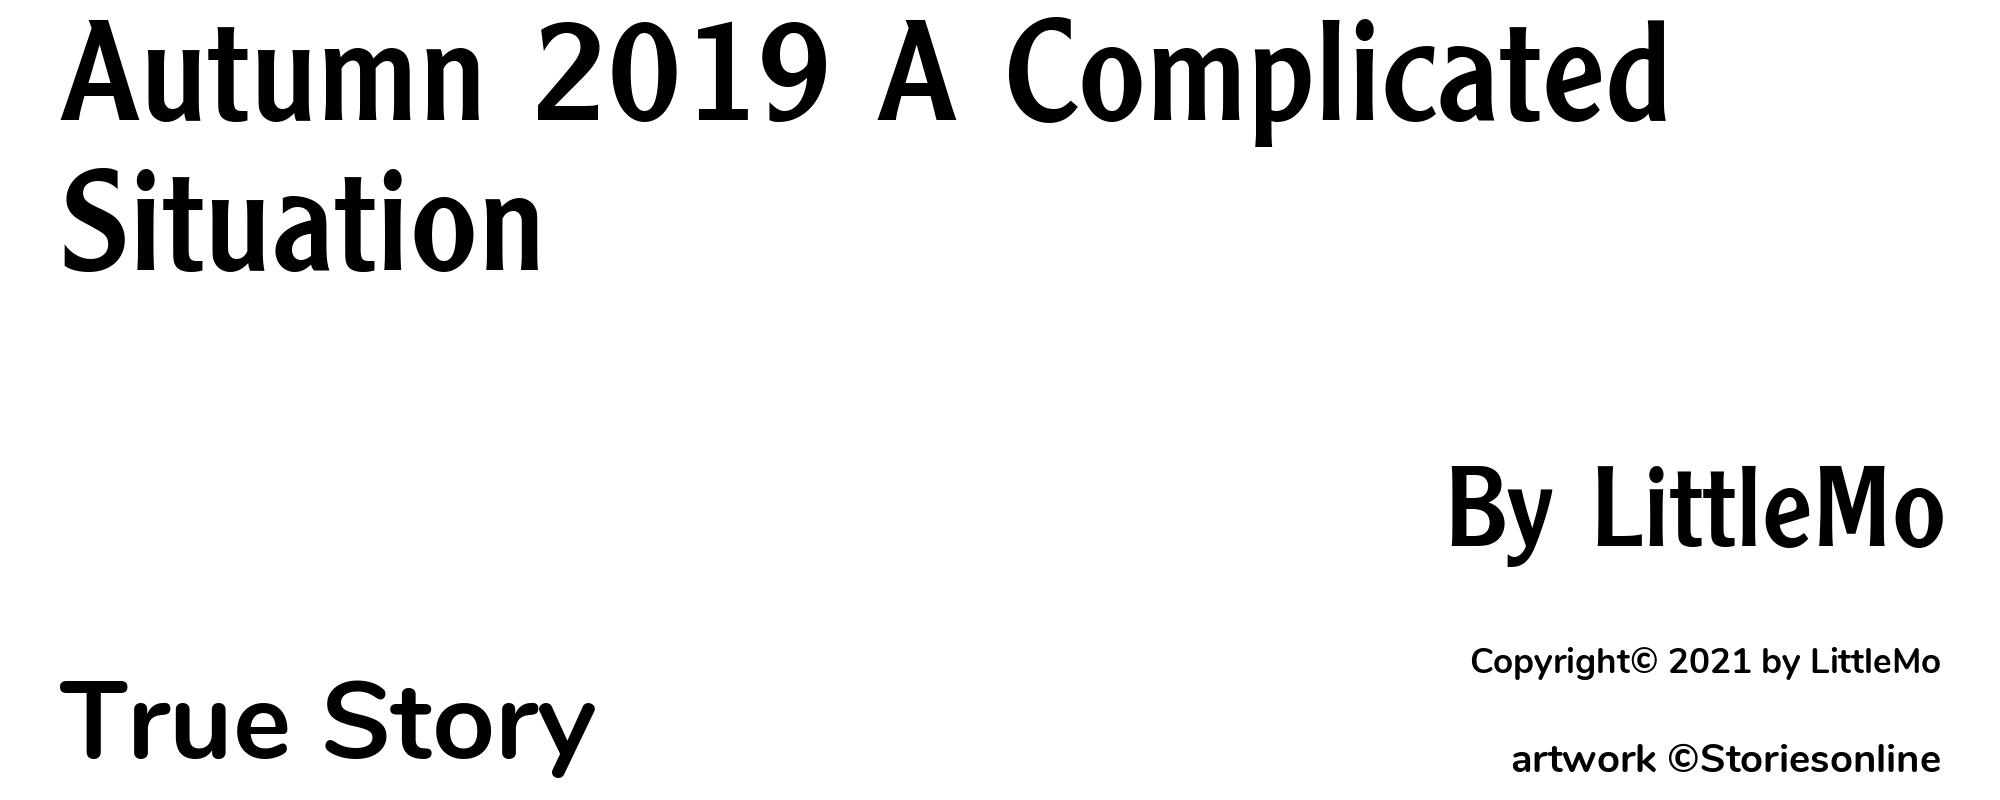 Autumn 2019 A Complicated Situation - Cover